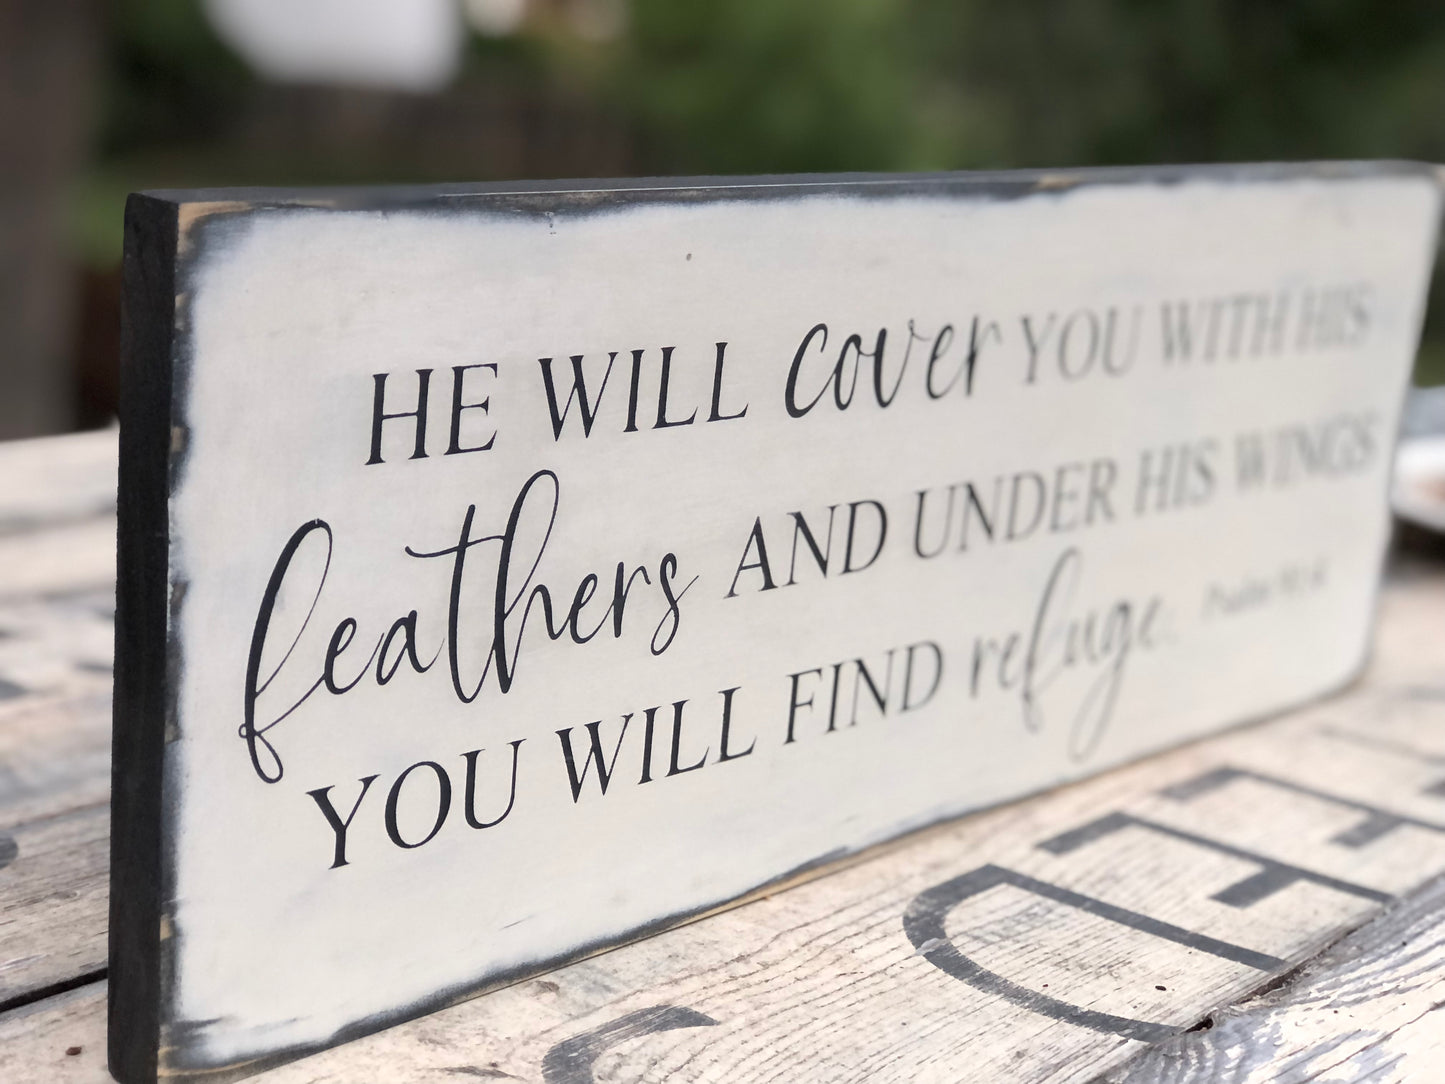 HE WILL COVER YOU WITH HIS FEATHERS AND UNDER HIS WINGS - WOOD SIGN